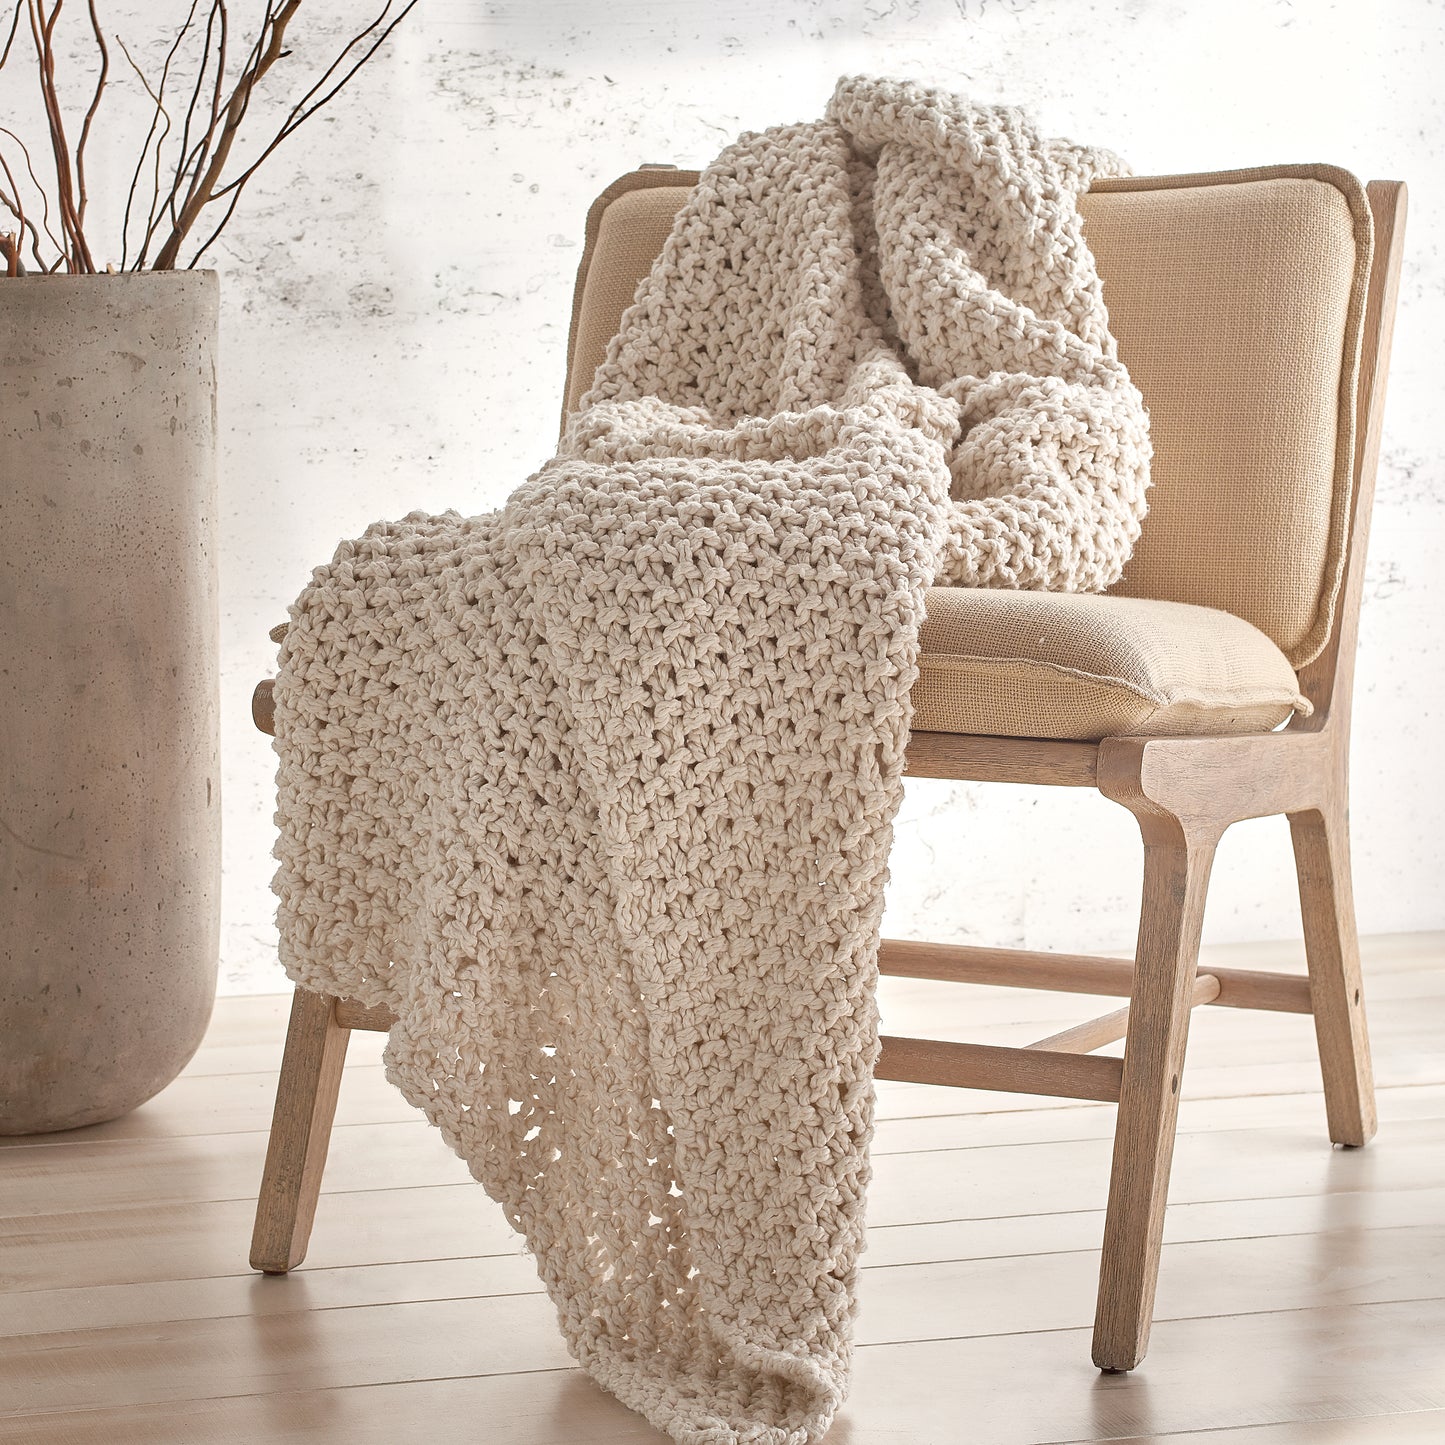 DKNY PURE Chunky Knit Throw Natural